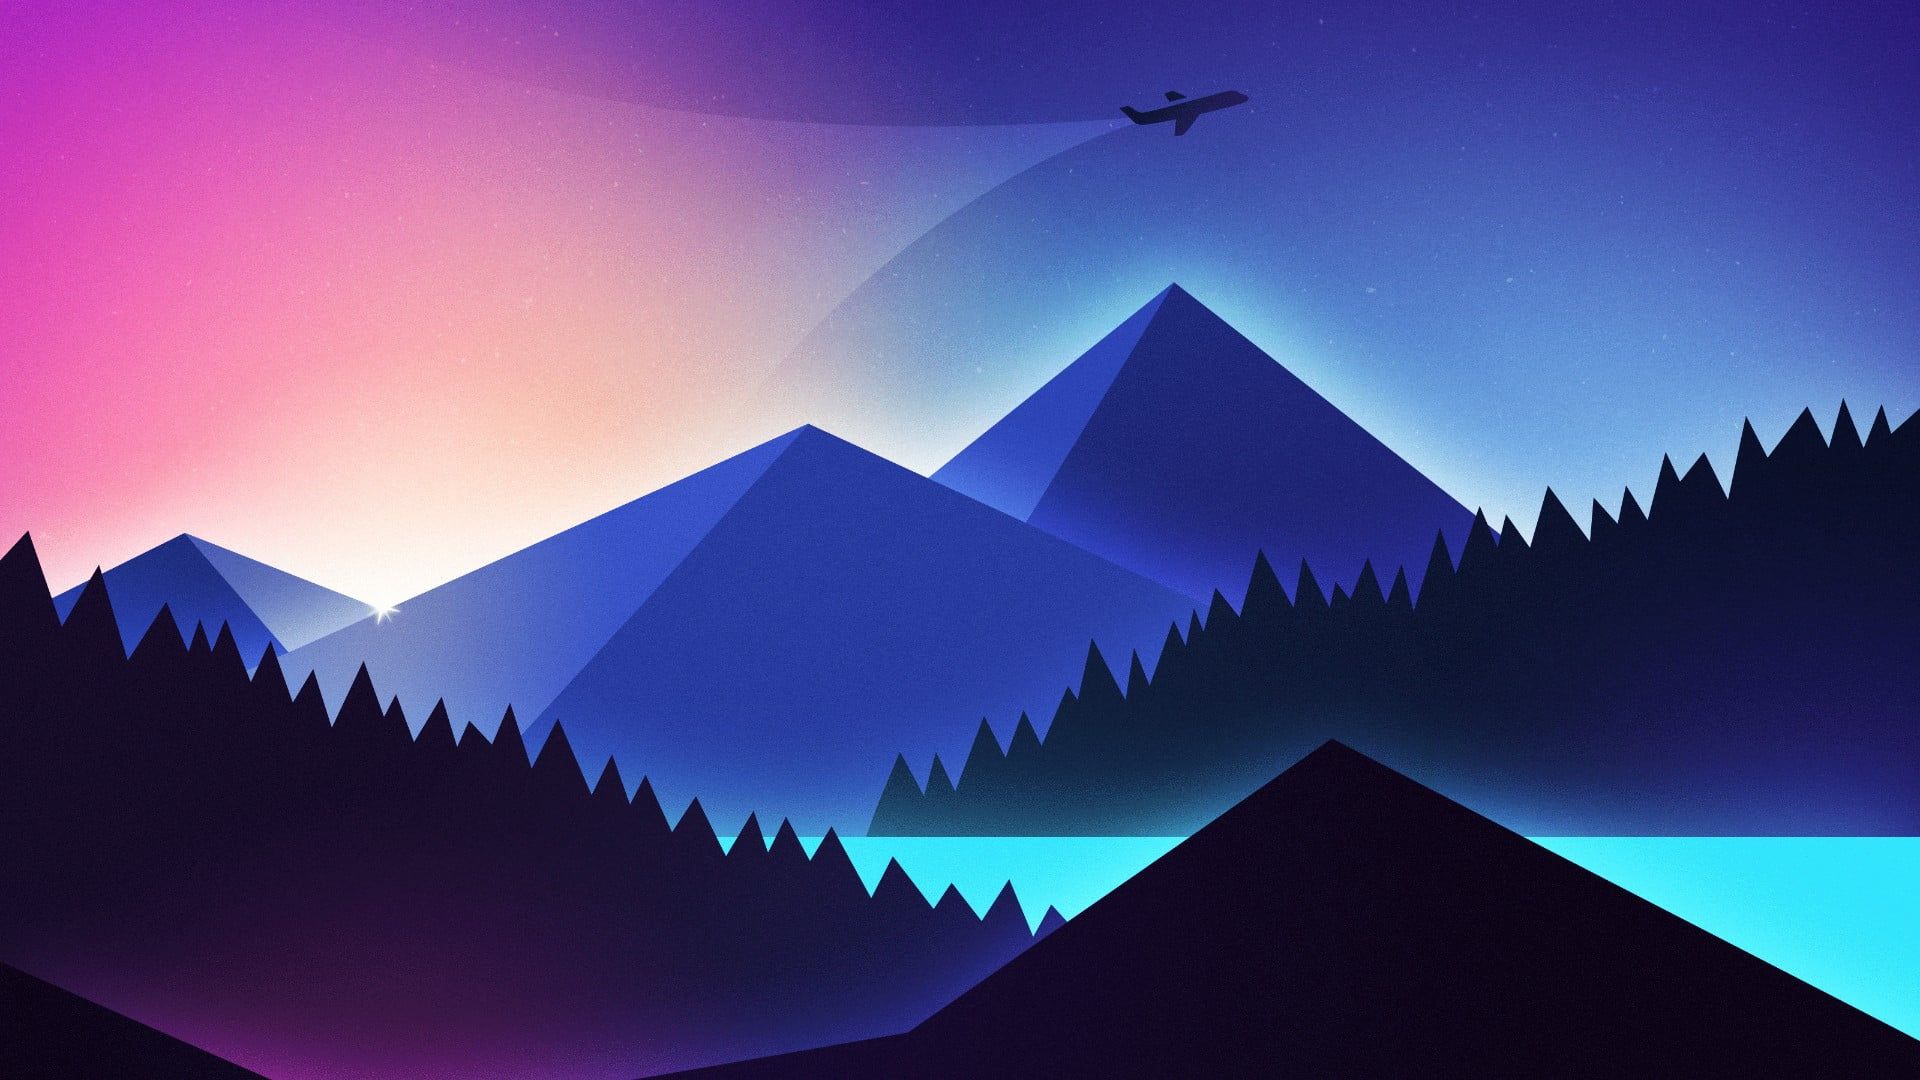 Abstract Wallpaper • Abstract wallpaper, mountain, airplane, pink, minimalistic, minimalism • Wallpaper For You The Best Wallpaper For Desktop & Mobile